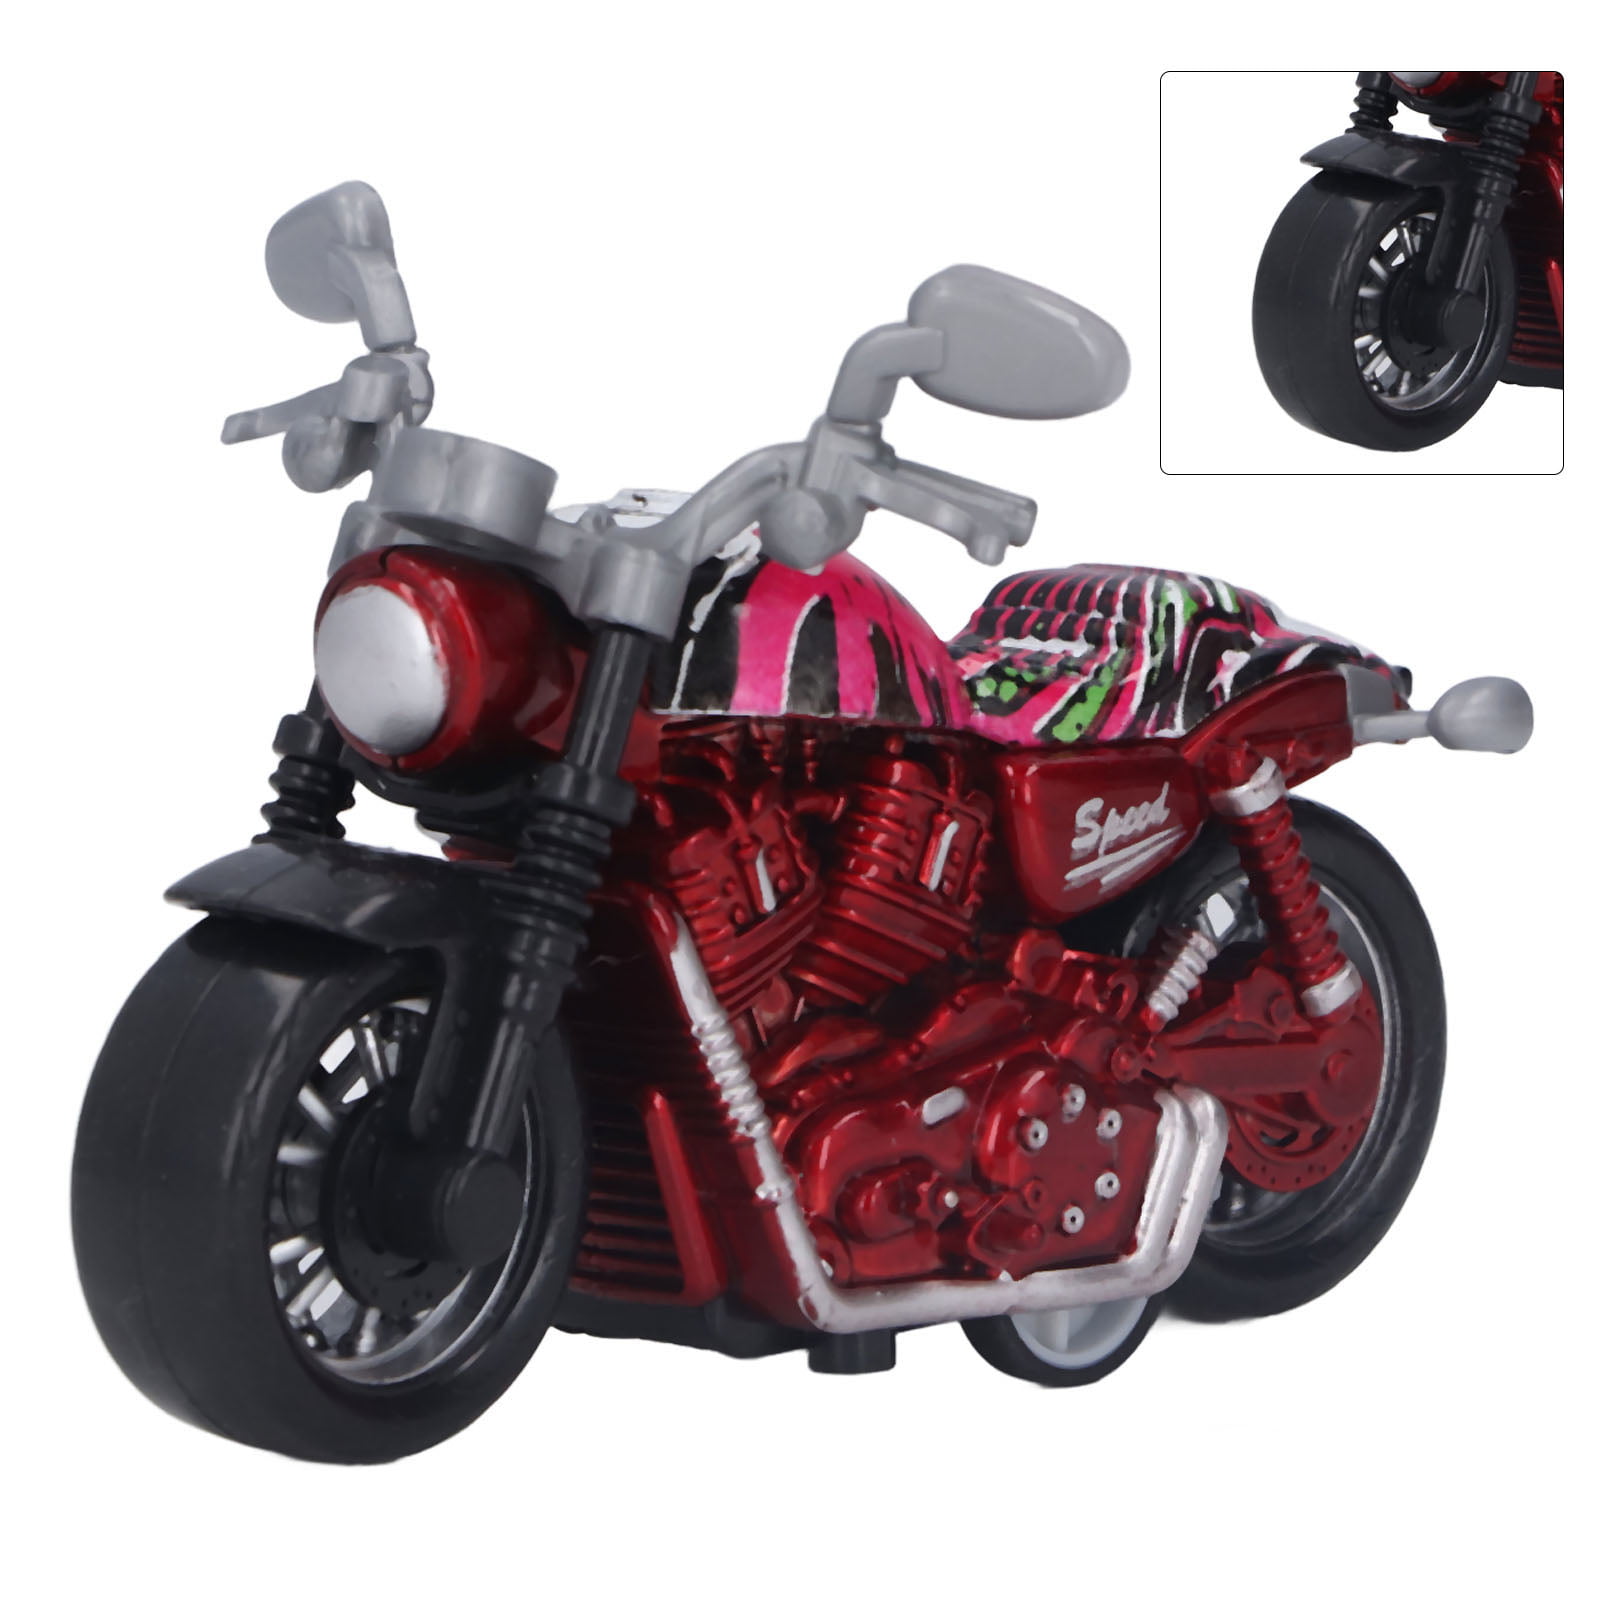 New Alloy Highway Motorcycle Diecast Vehicle Model Toy Display Music & Sound 